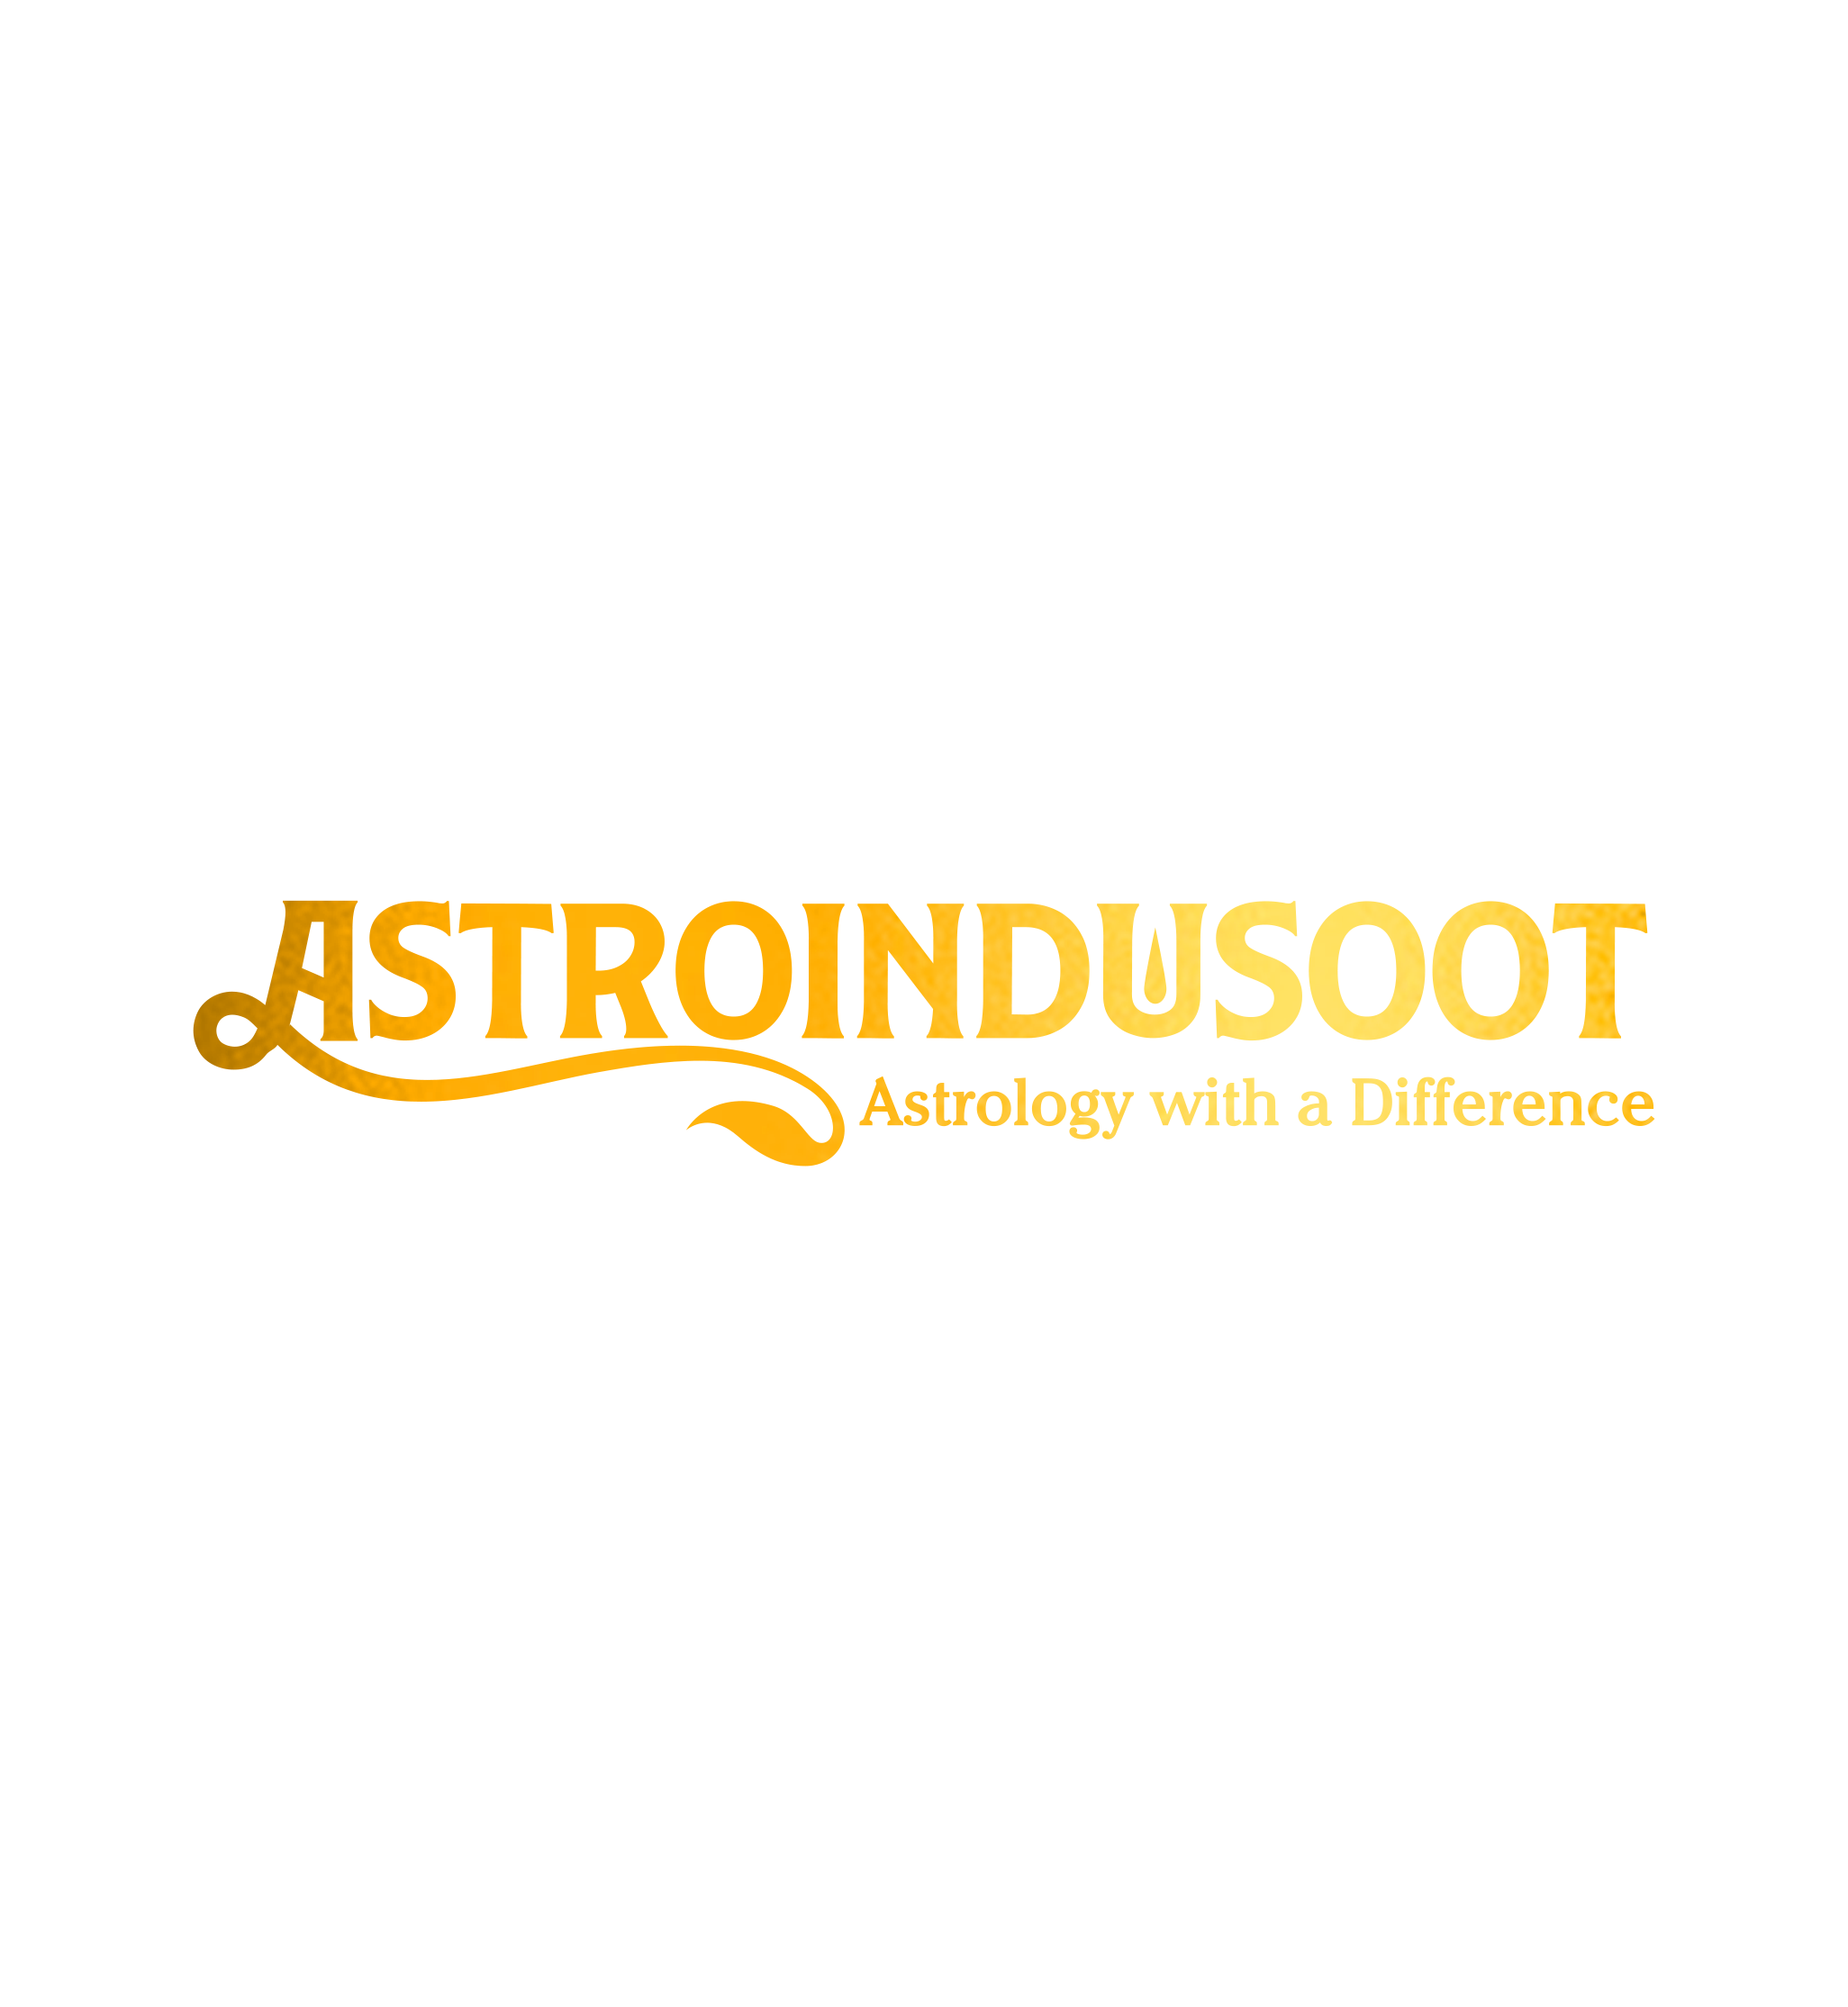 Astroindusoot  Ind